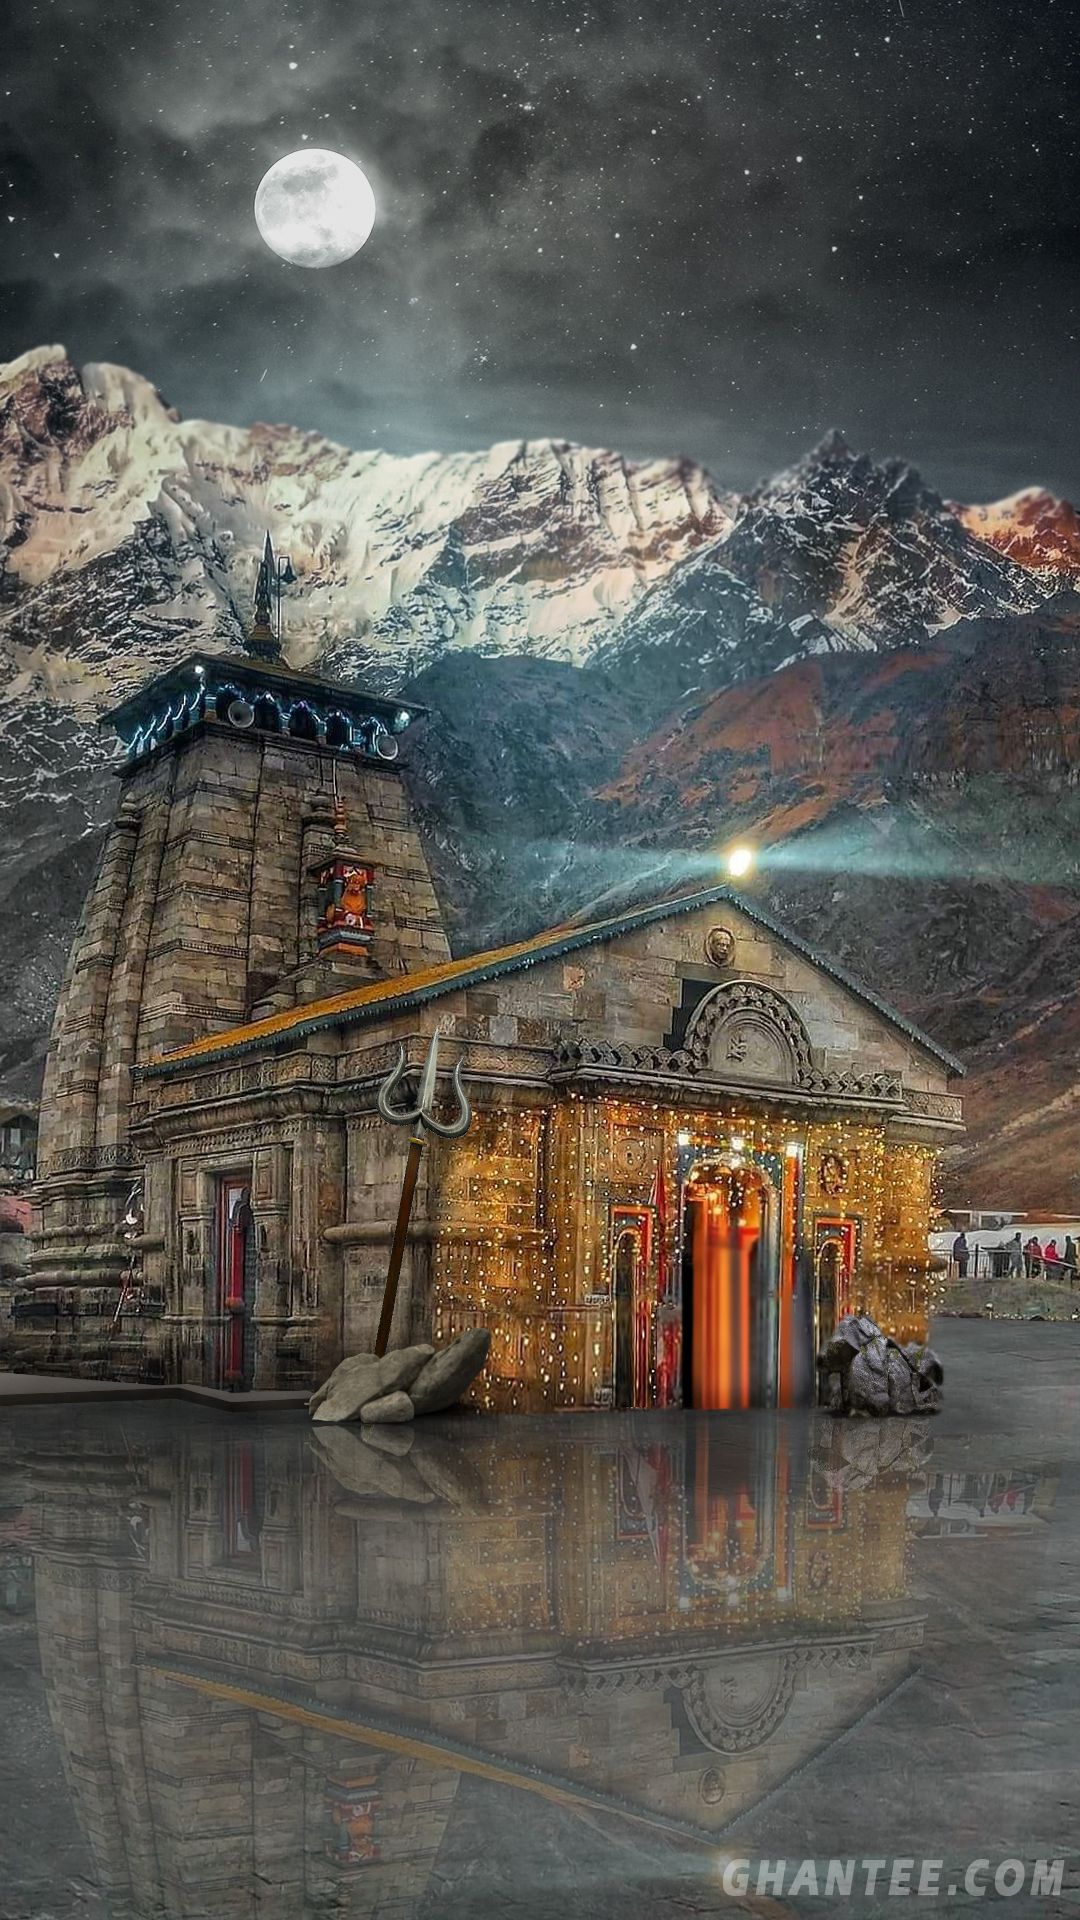 Kedarnath hd wallpaper for android and ios devices ghantee full hd wallpaper download full hd wallpaper android hd wallpaper android